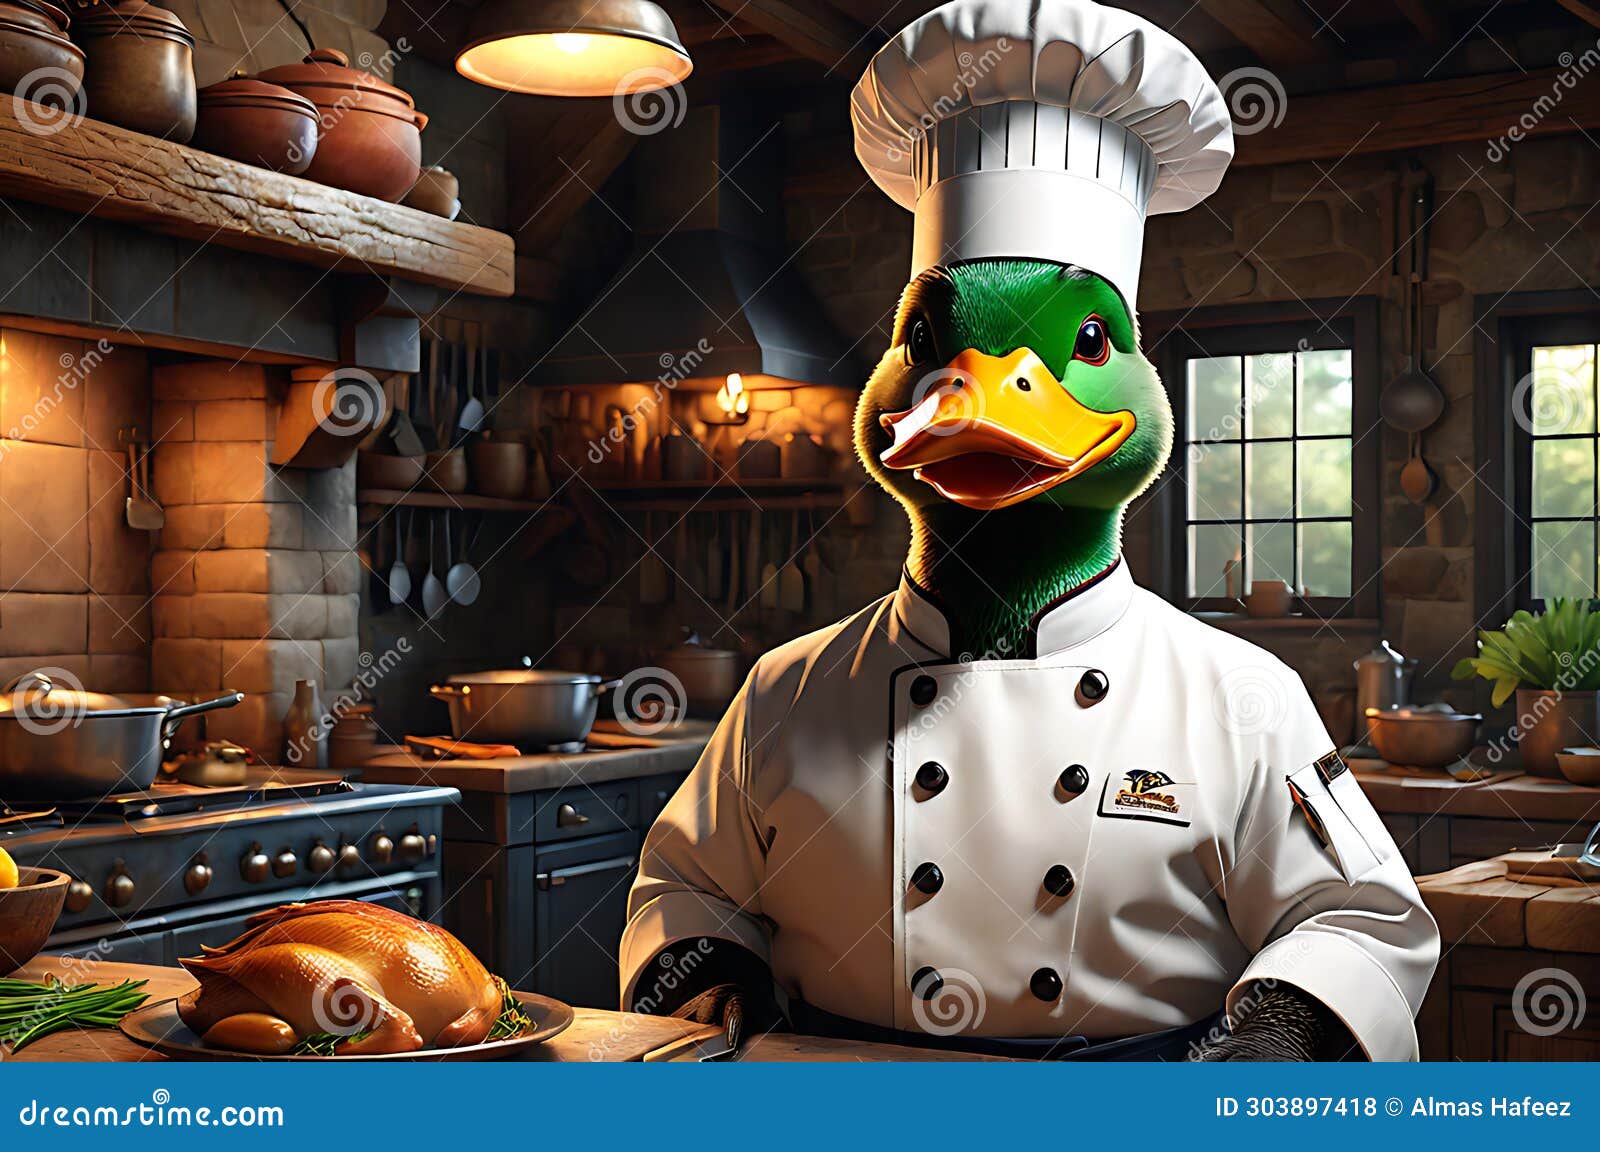 quirky culinary maestro: duck adorned in tailored chef uniform, poised in rustic kitchen ambiance, crafting culinary delights